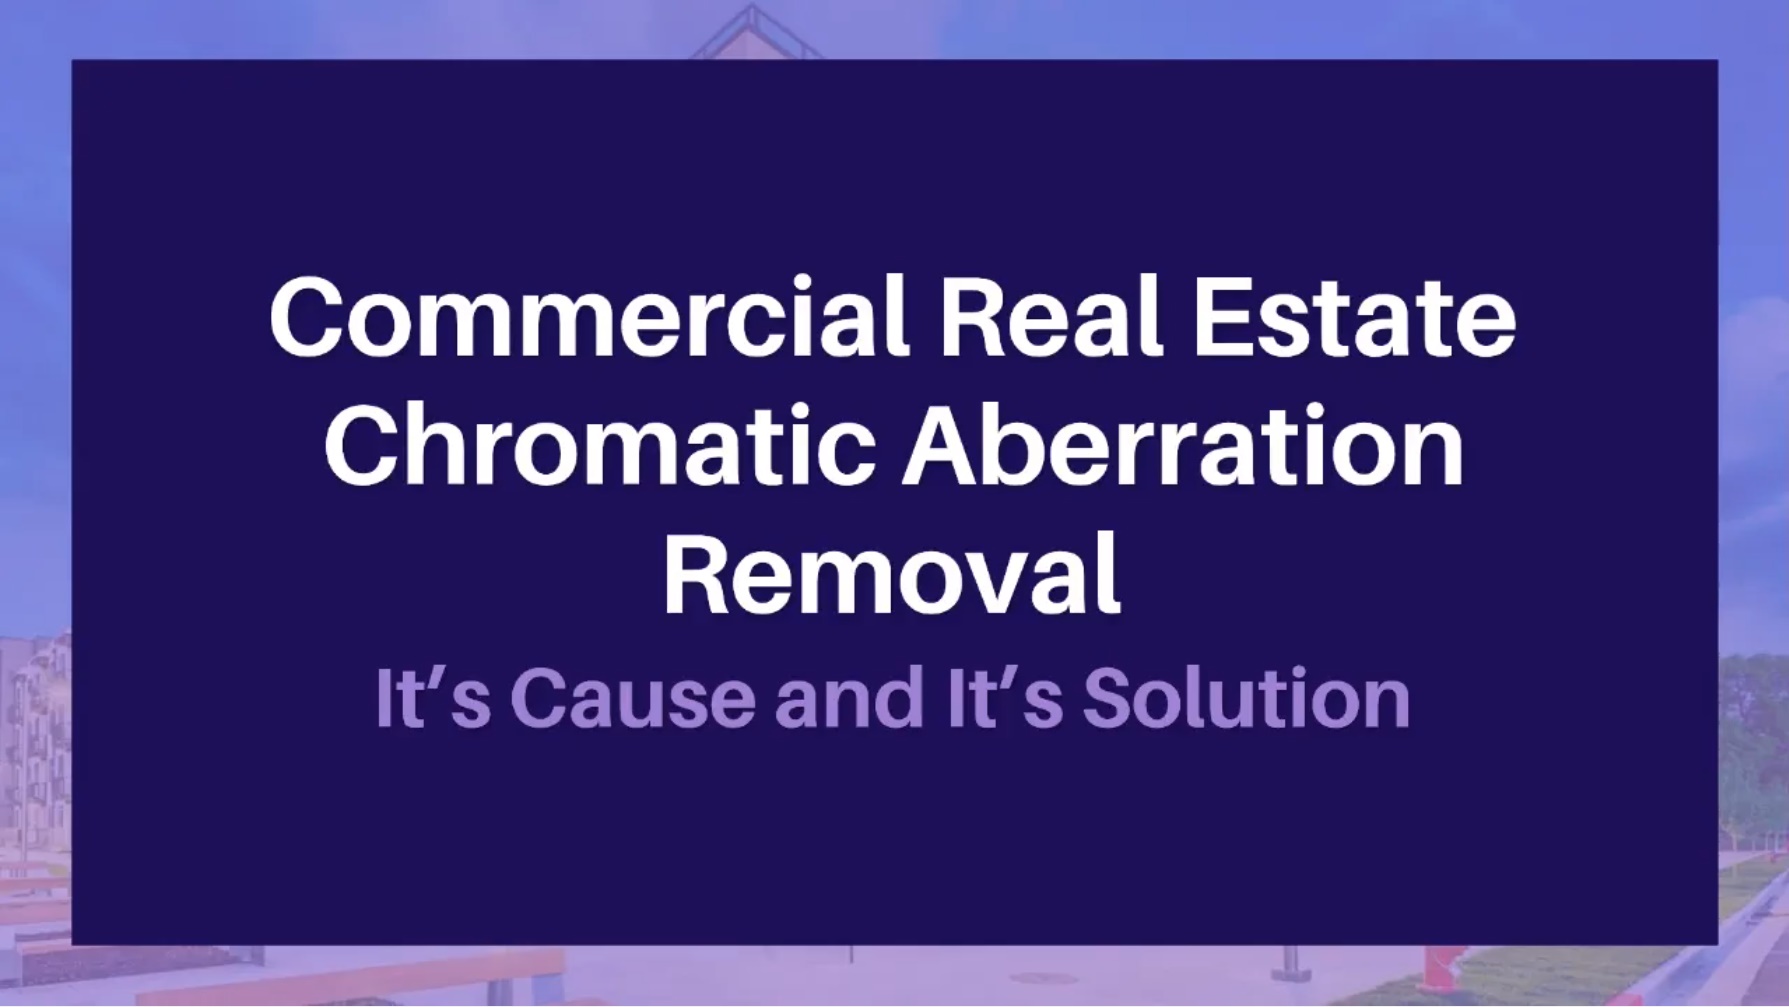 Commercial Real Estate Chromatic Aberration Removal - It’s Cause and It’s Solution